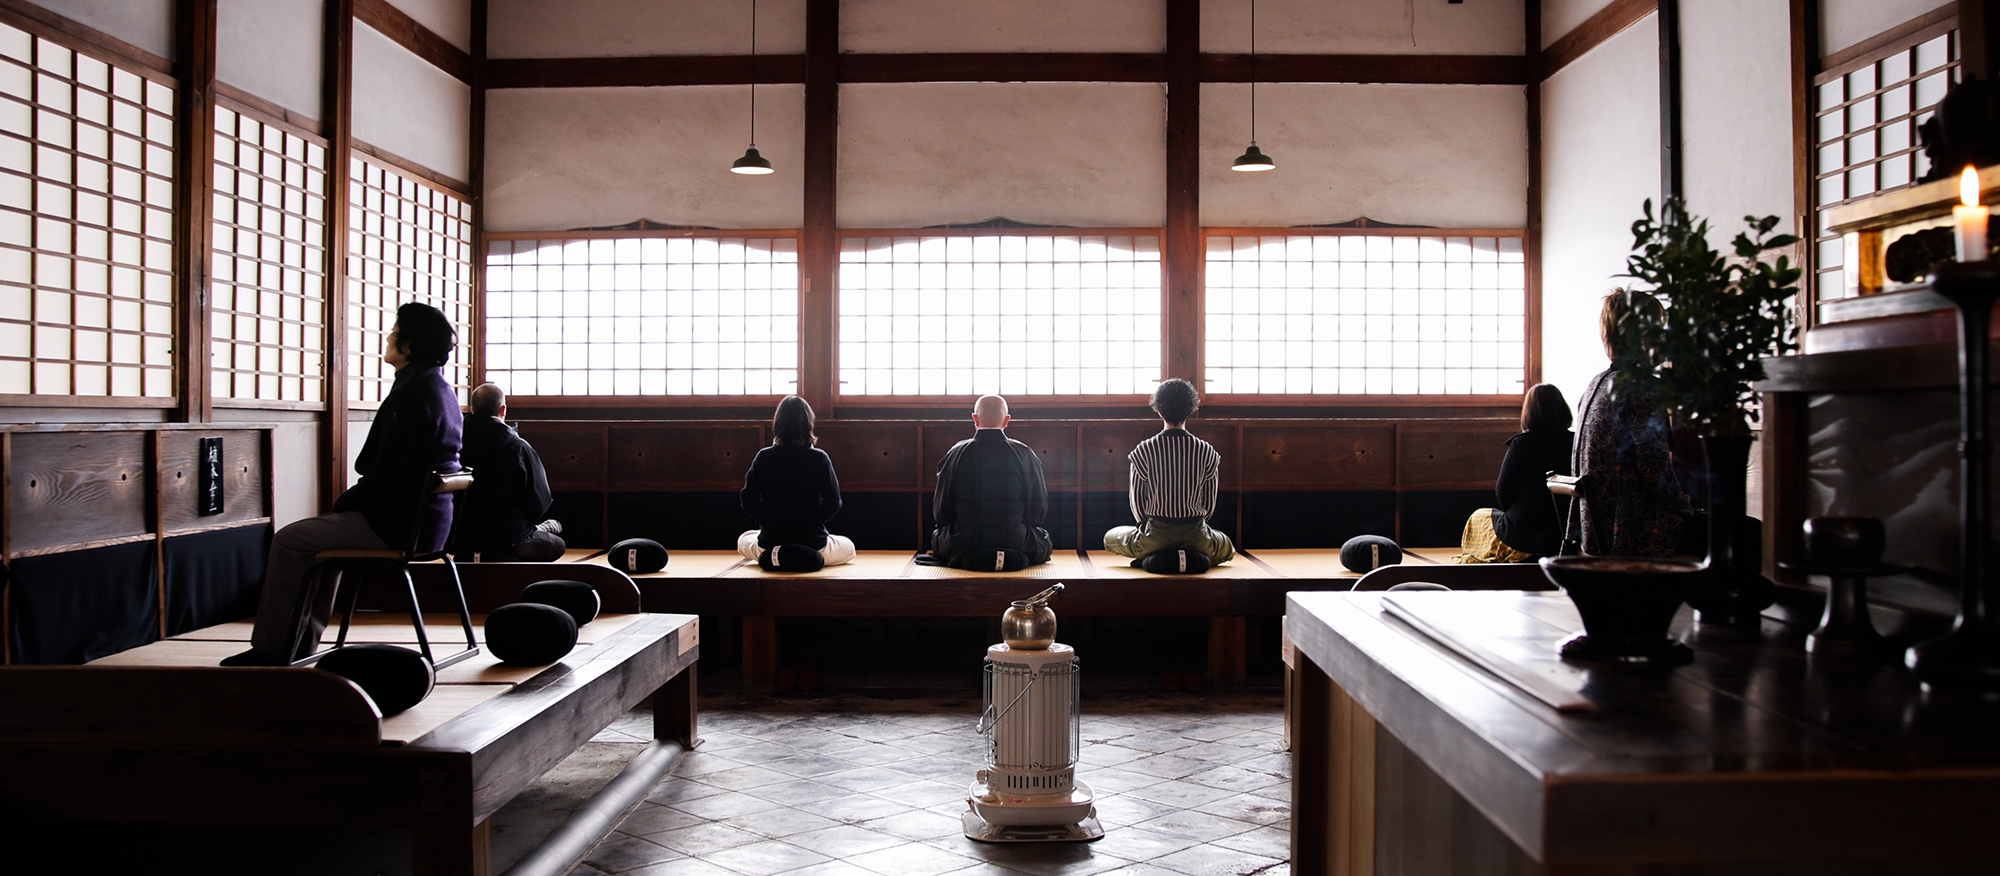 [Kyoto/Uji] Zen meditation and matcha green tea at Koshoji, the oldest Zen temple of the Soto school, plus an exceptional ink calligraphy experience taught by a renowned artist. -Kousho-ji Temple, the oldest Soto Zen temple among more than 14,000 Soto Zen temples in Japan.